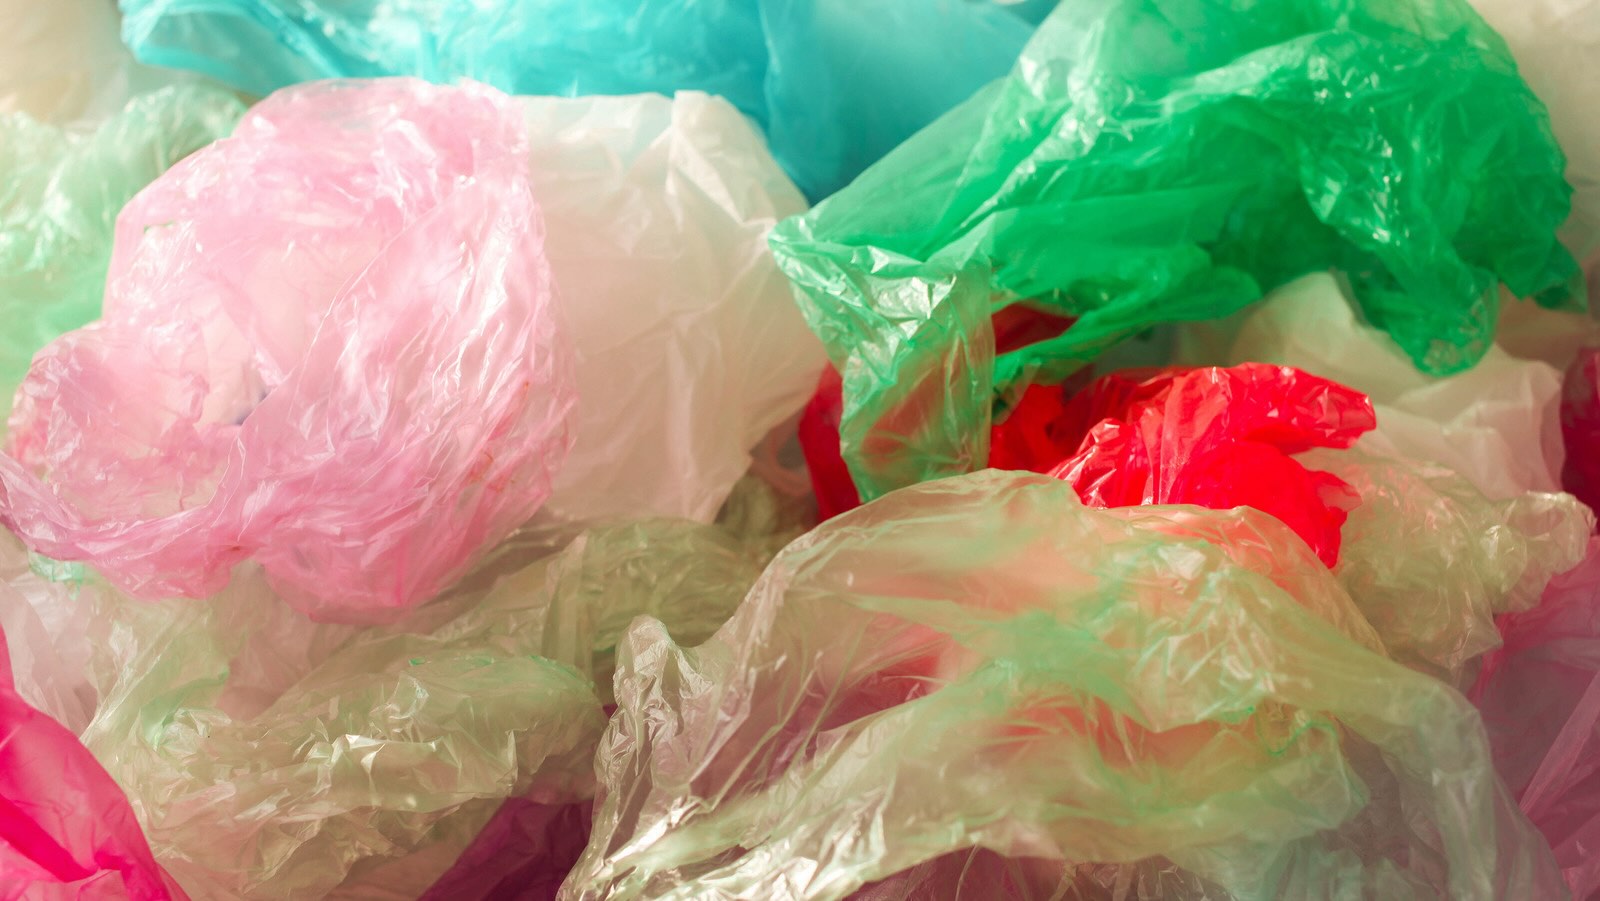 How To Store Plastic Grocery Bags